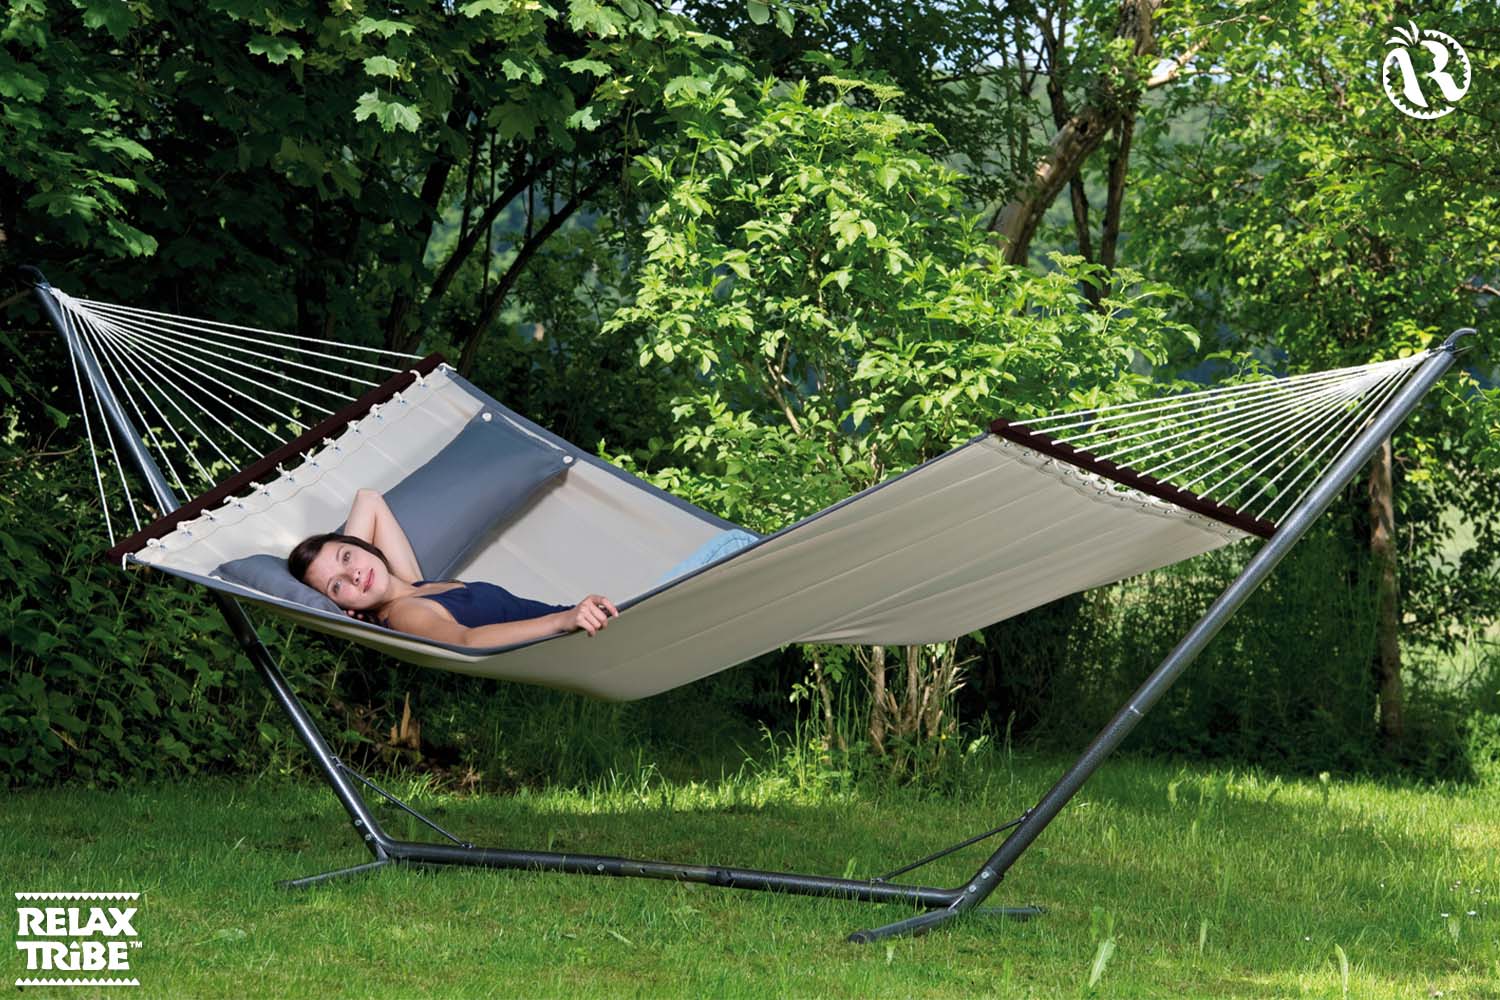 american-dream-sand-double-xl-padded-hammock-with-bars-pillow-beige-grey-garden-metal-stand